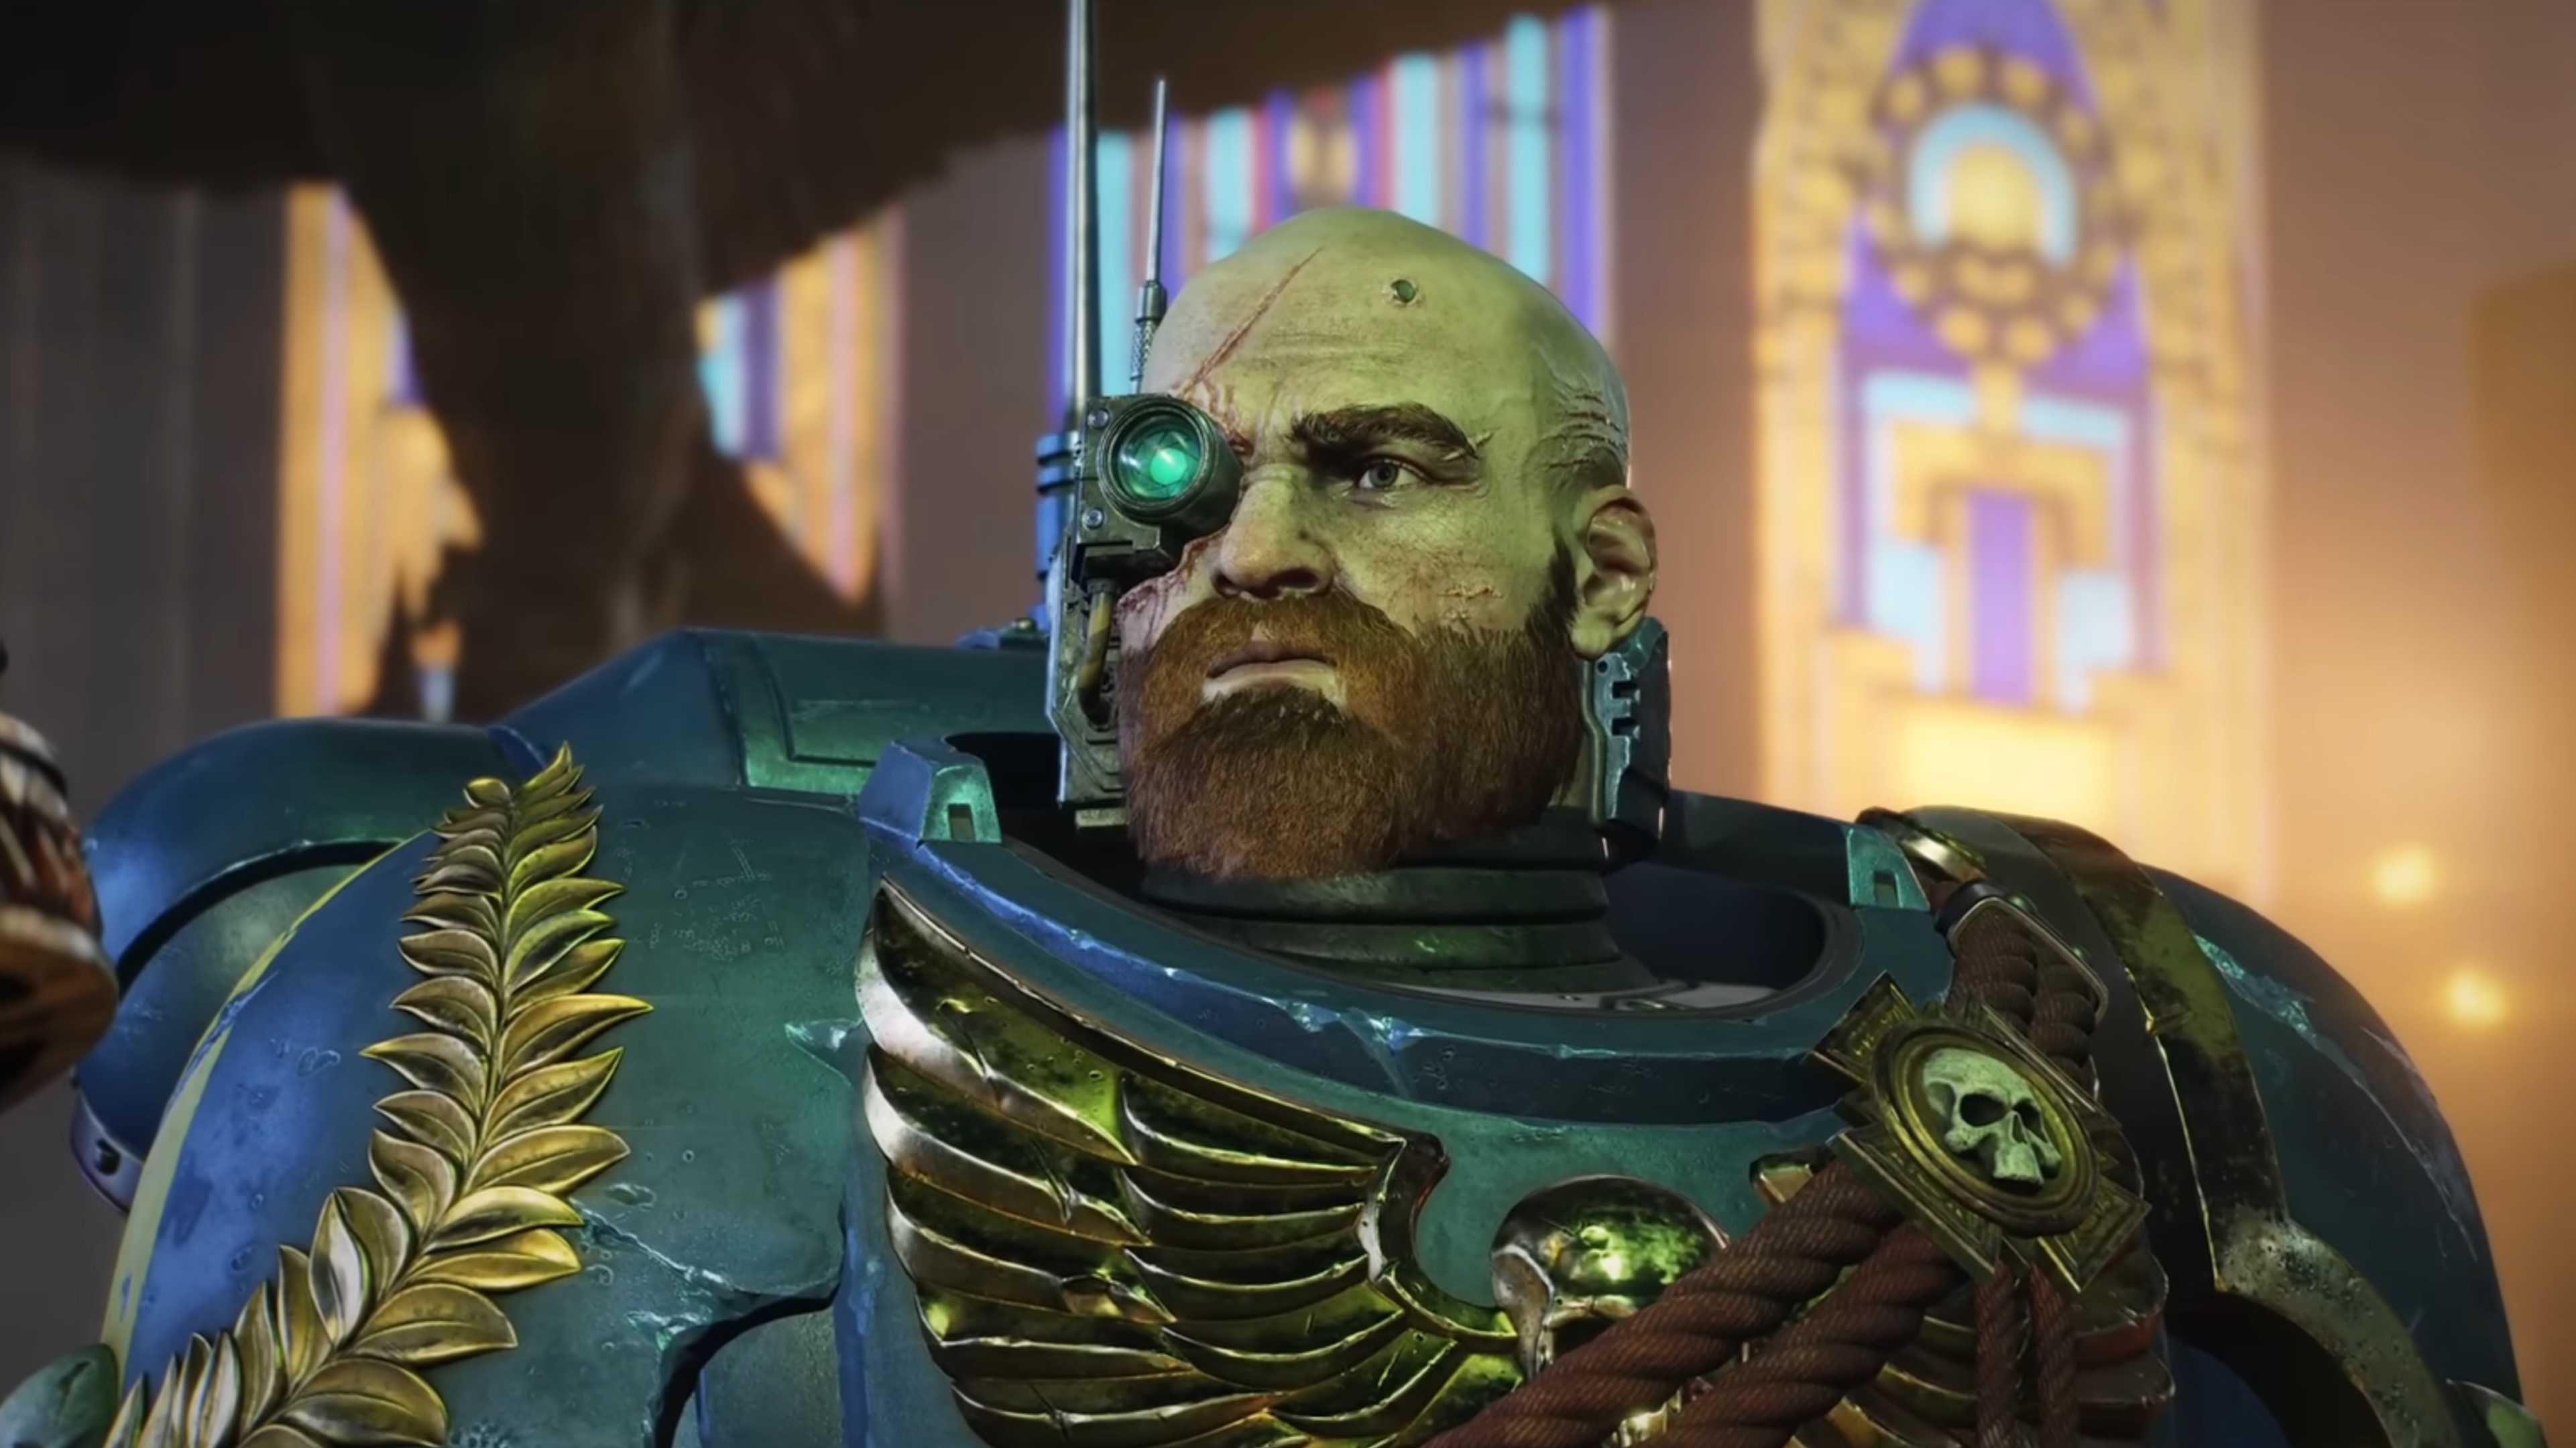  Space Marines 2 confirms the return of PvP multiplayer, plus an all-new 3-player co-op mode 